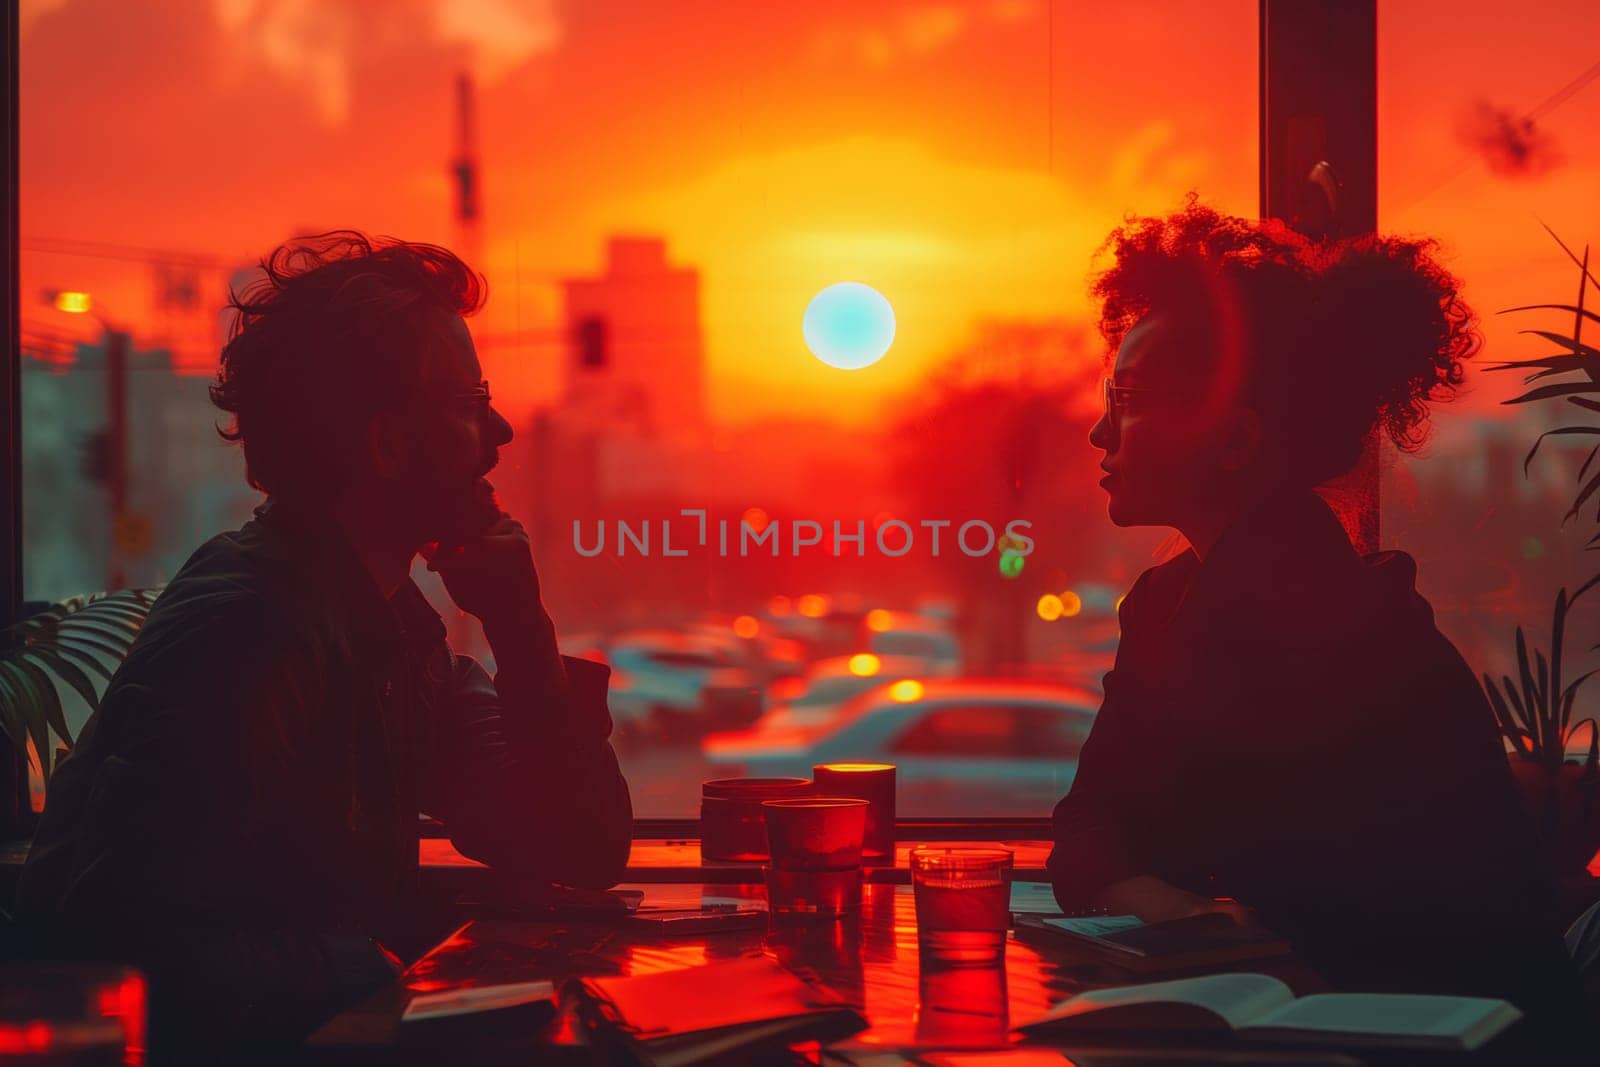 A man and a woman are gazing at each other under the orange sky of the sunset by richwolf